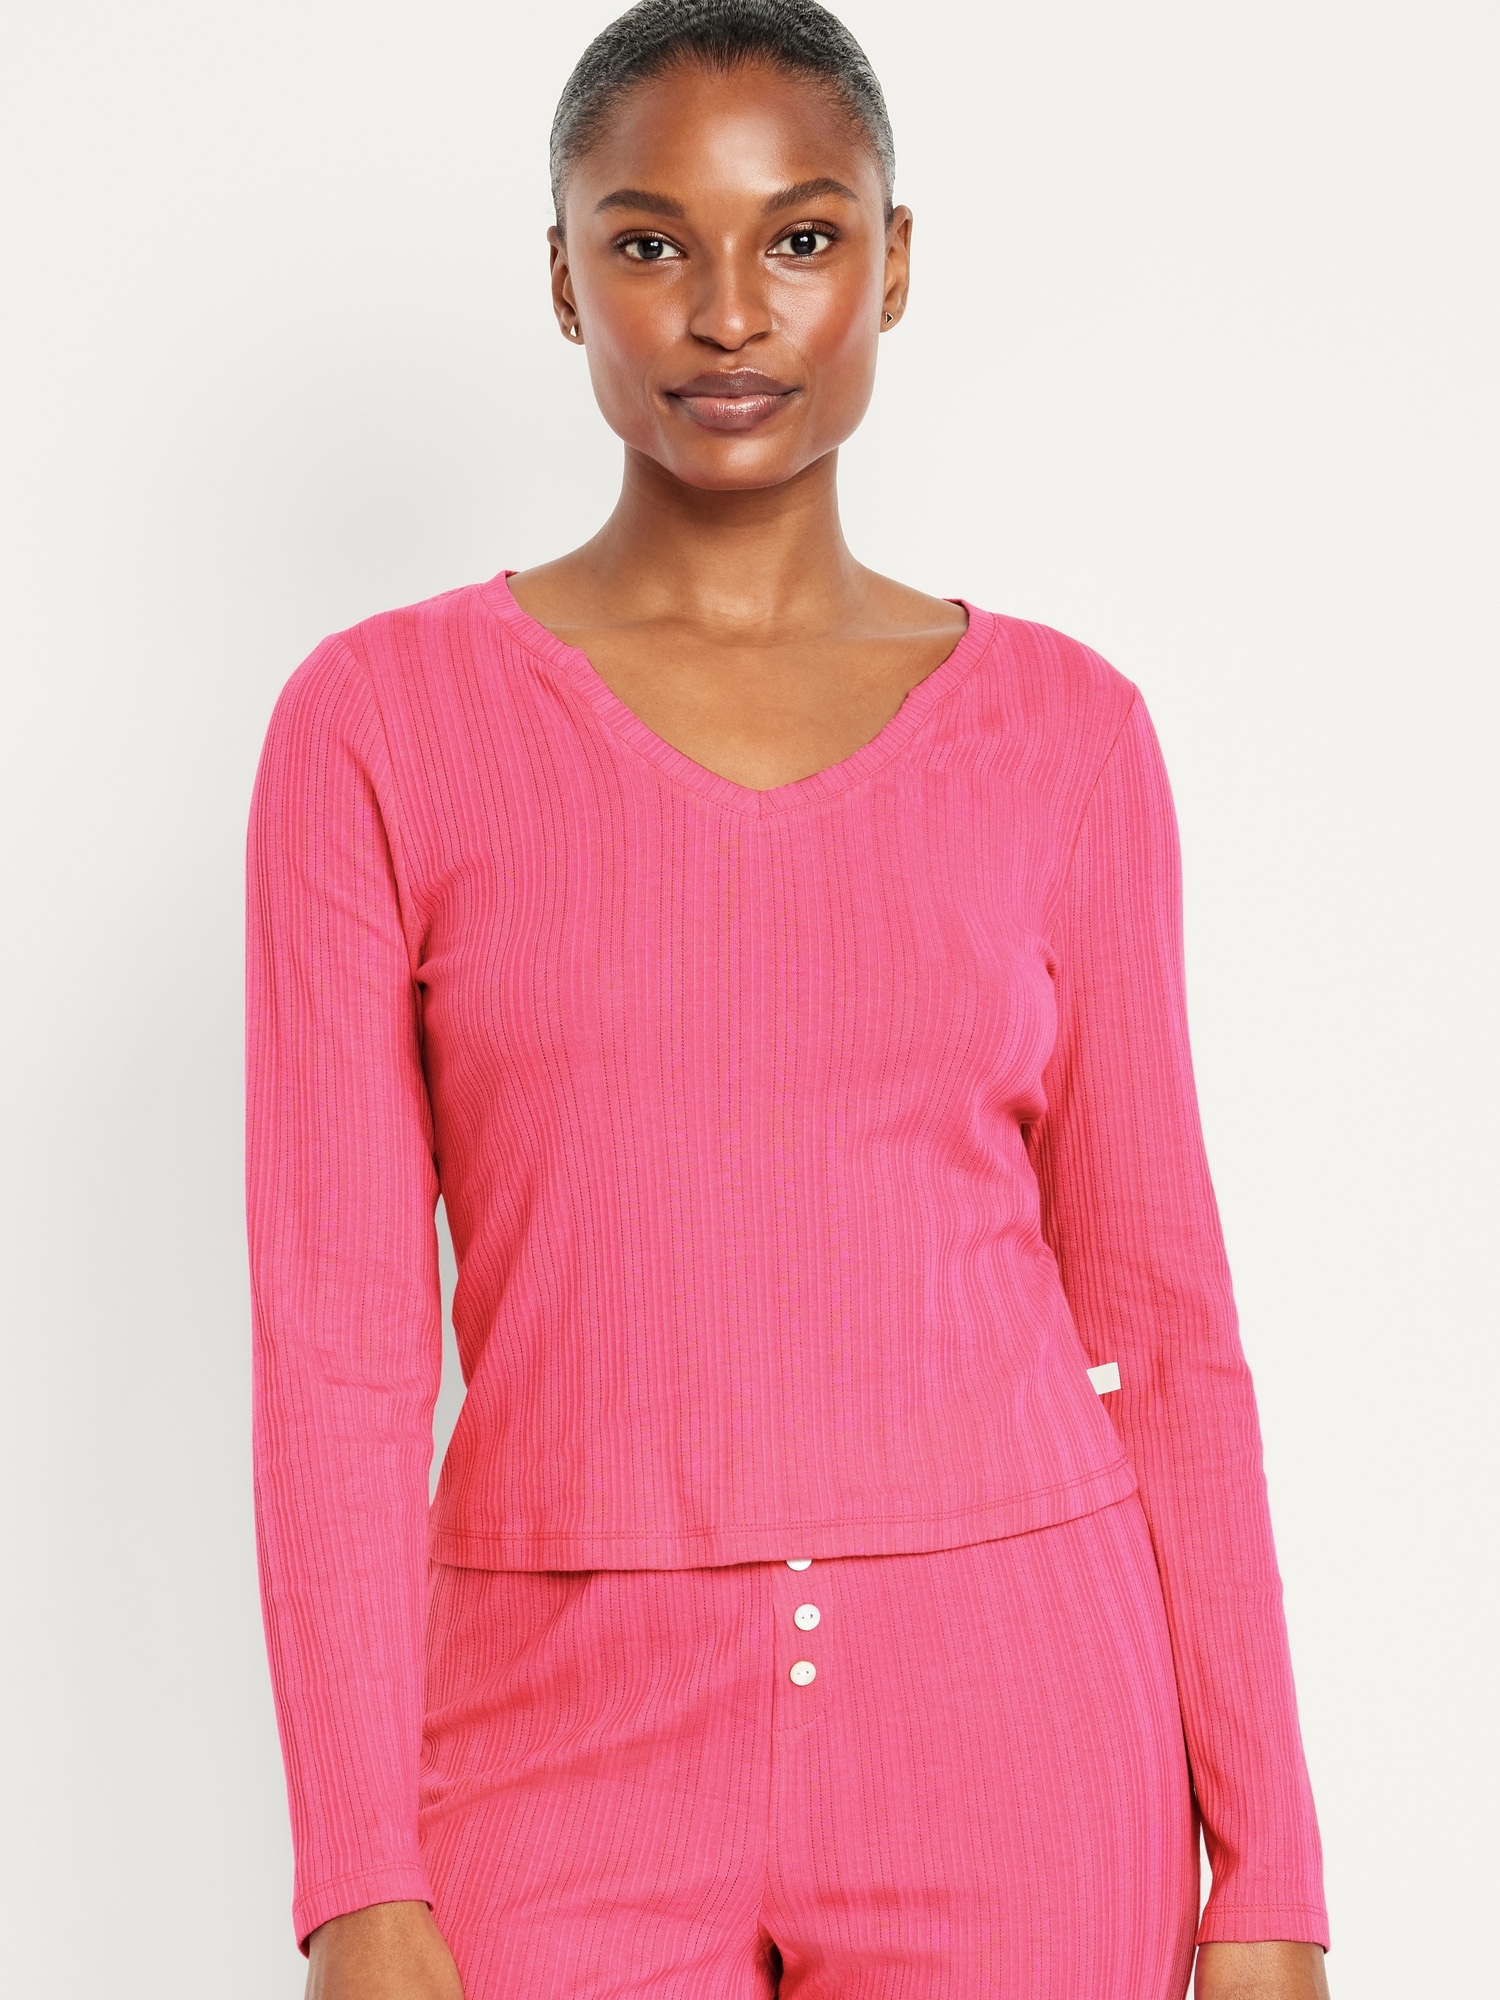 Pointelle Knit Pajama Top | Old Navy